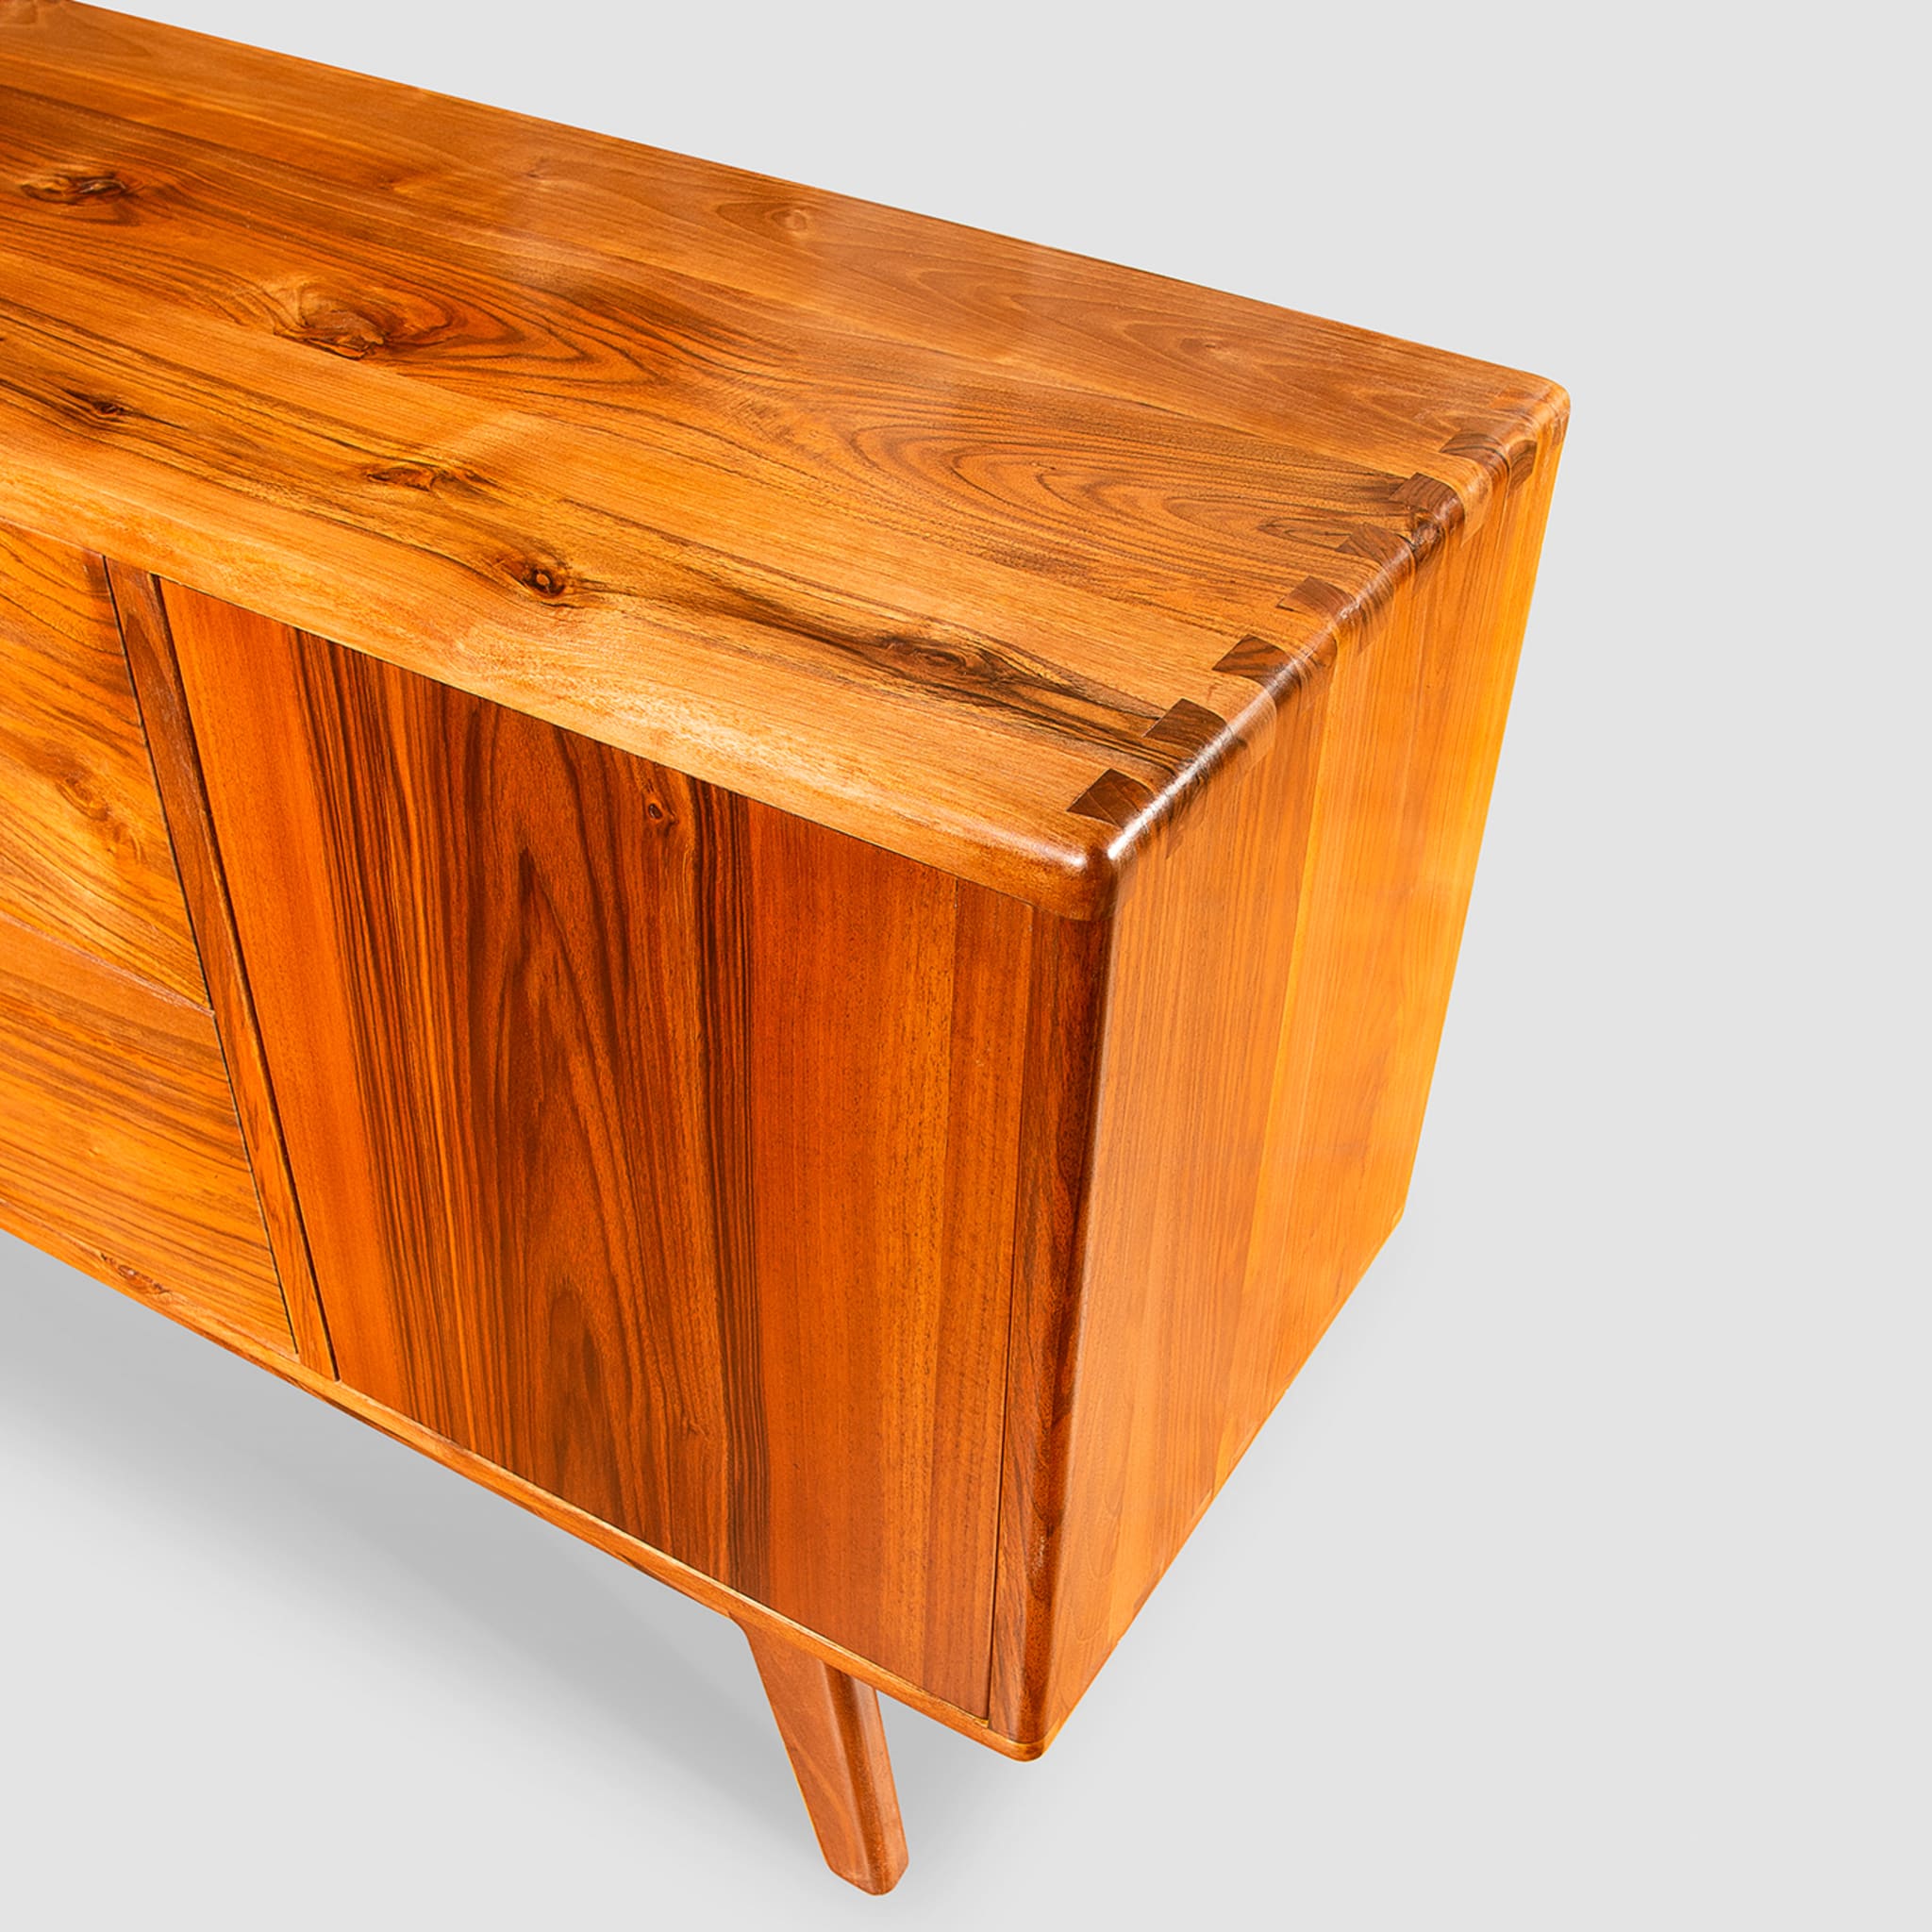 Dovetail Sideboard by Eugenio Gambella - Alternative view 2